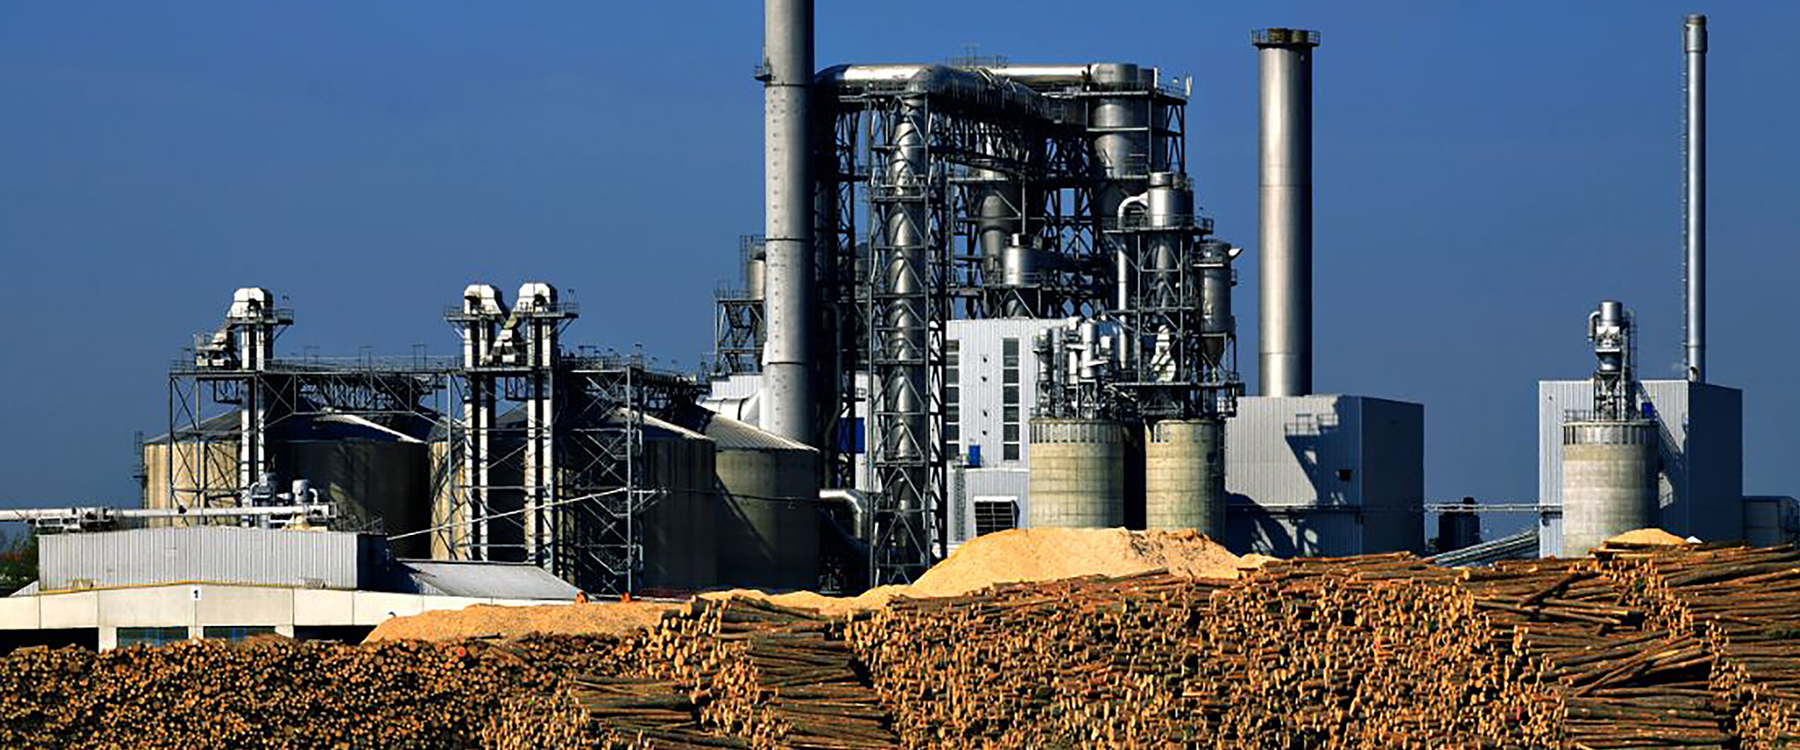 Pulp and paper facility that partners with Ferguson Industrial for quality PVF distribution.